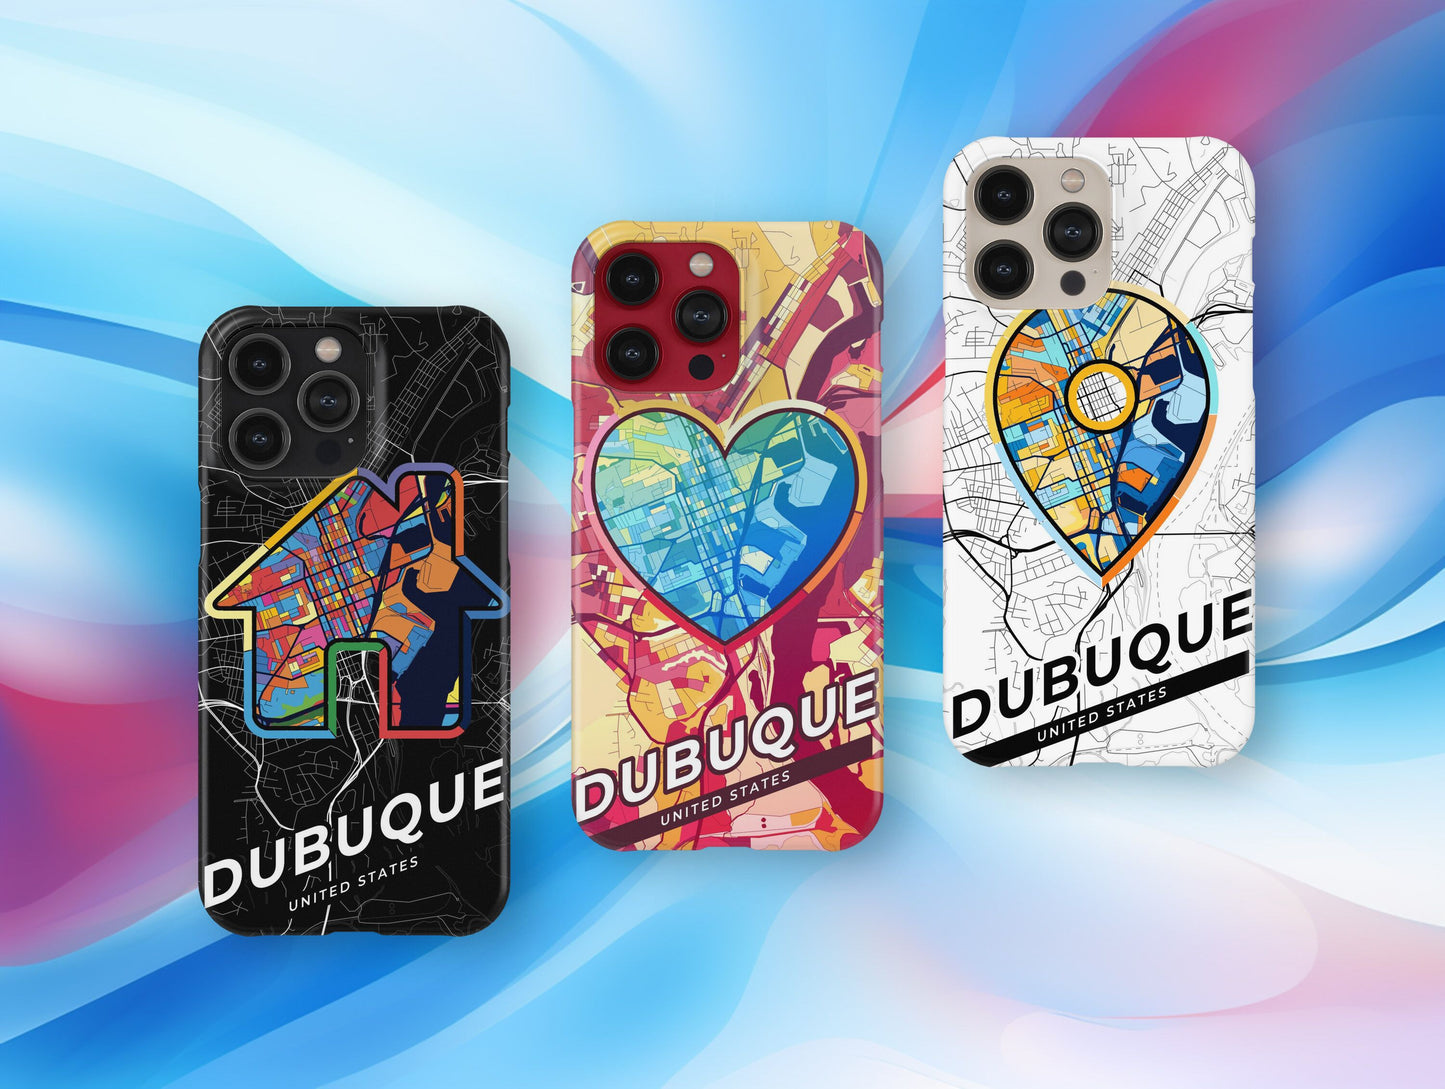 Dubuque Iowa slim phone case with colorful icon. Birthday, wedding or housewarming gift. Couple match cases.